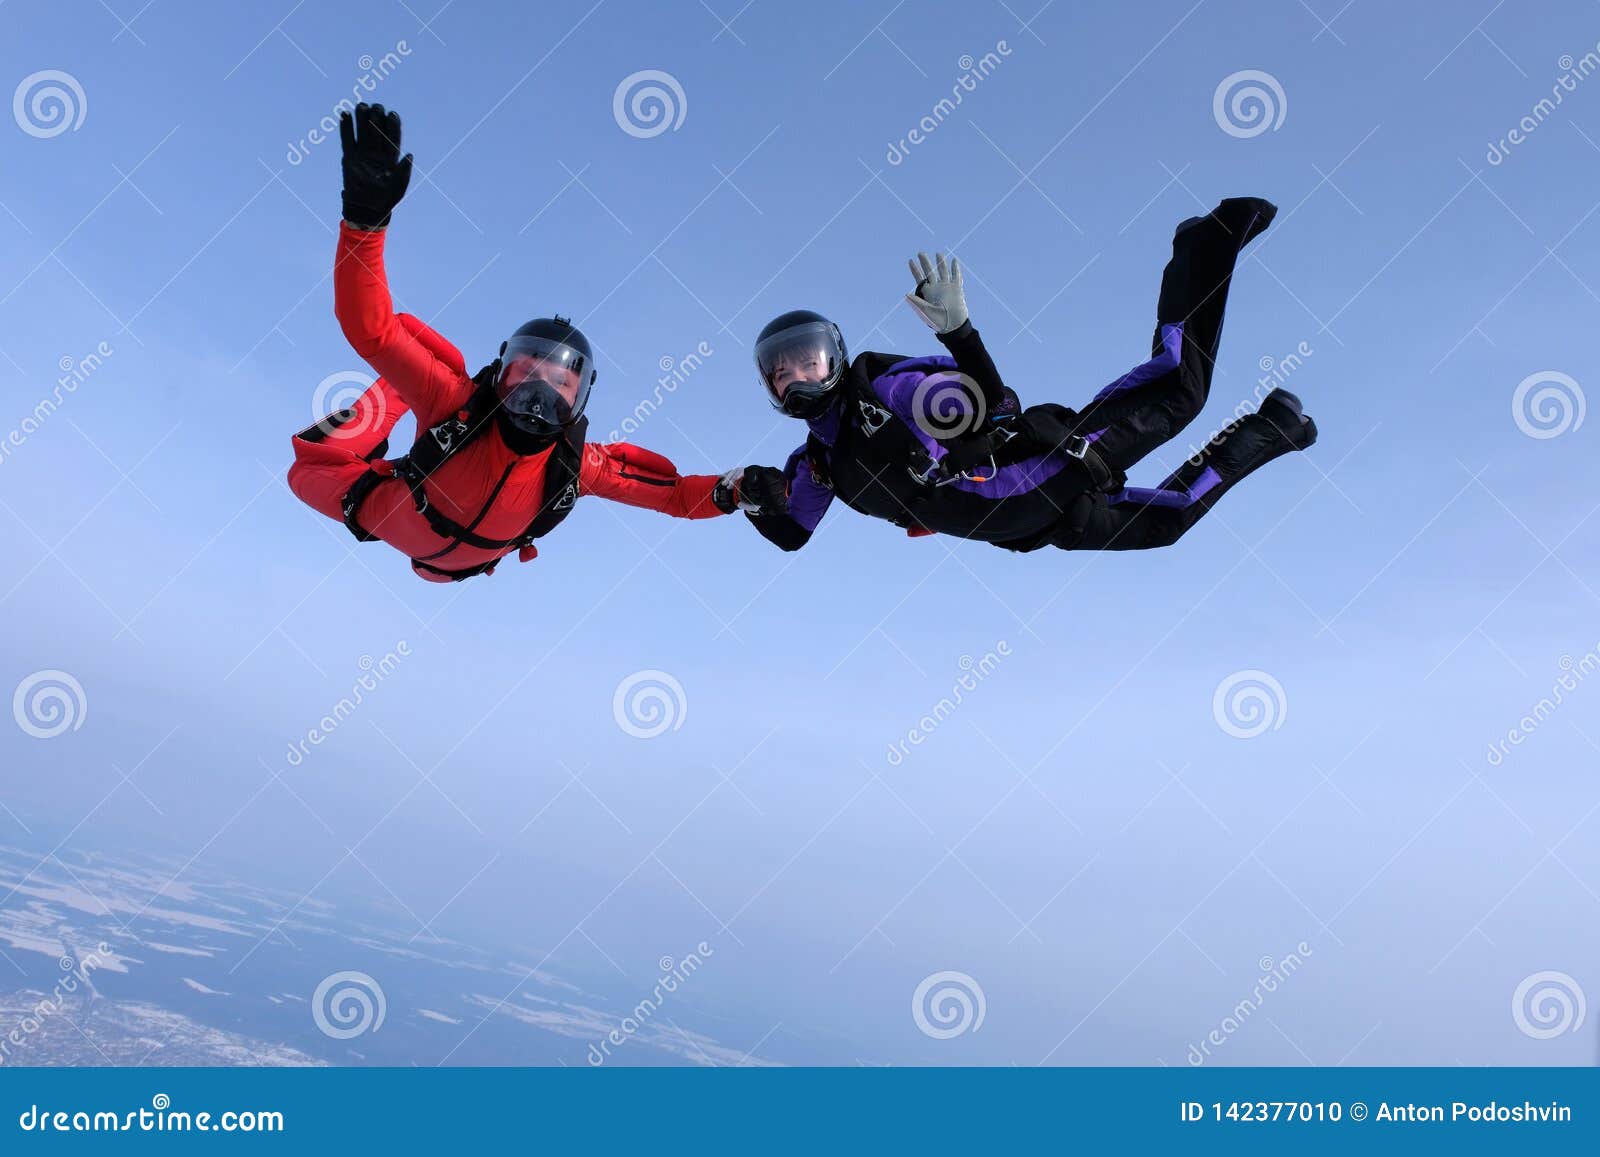 skydiving in the blue sky.. two skydivers send hello.